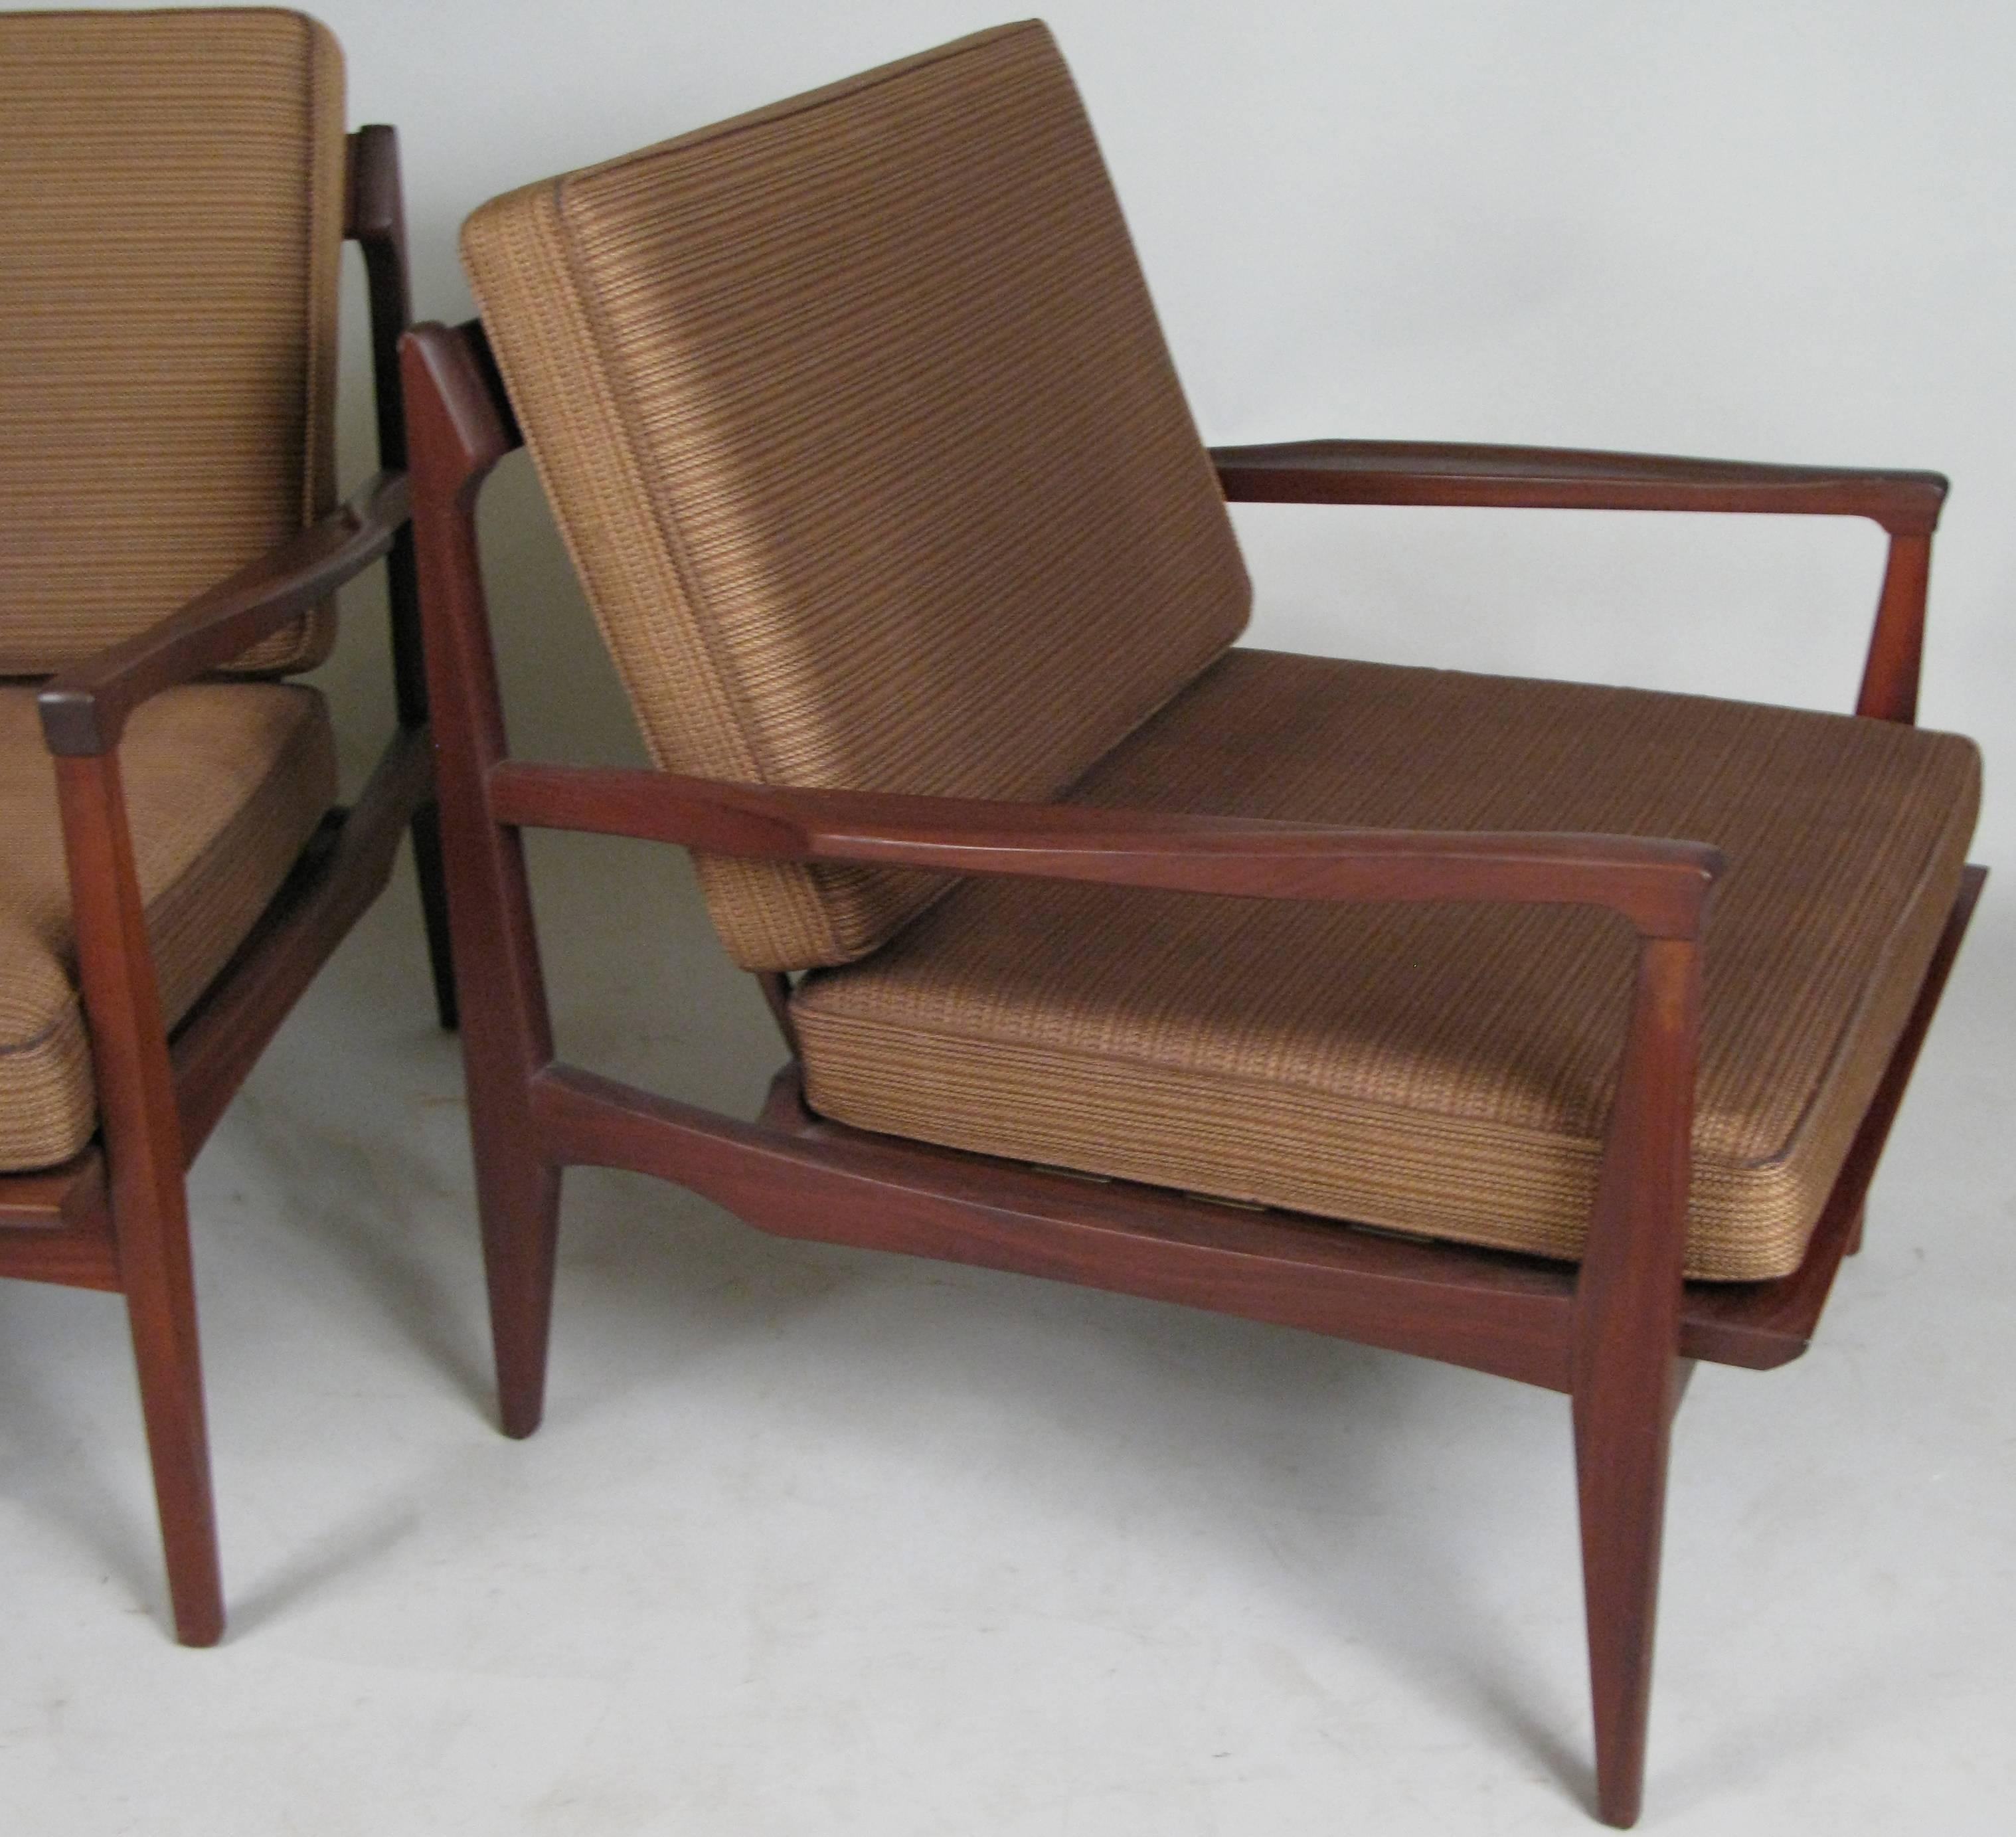 A pair of very handsome and well made 1950s teak lounge chairs made in Norway, with dark finished frames and beautiful details. Original upholstery on the cushions is in good condition with age expected wear.